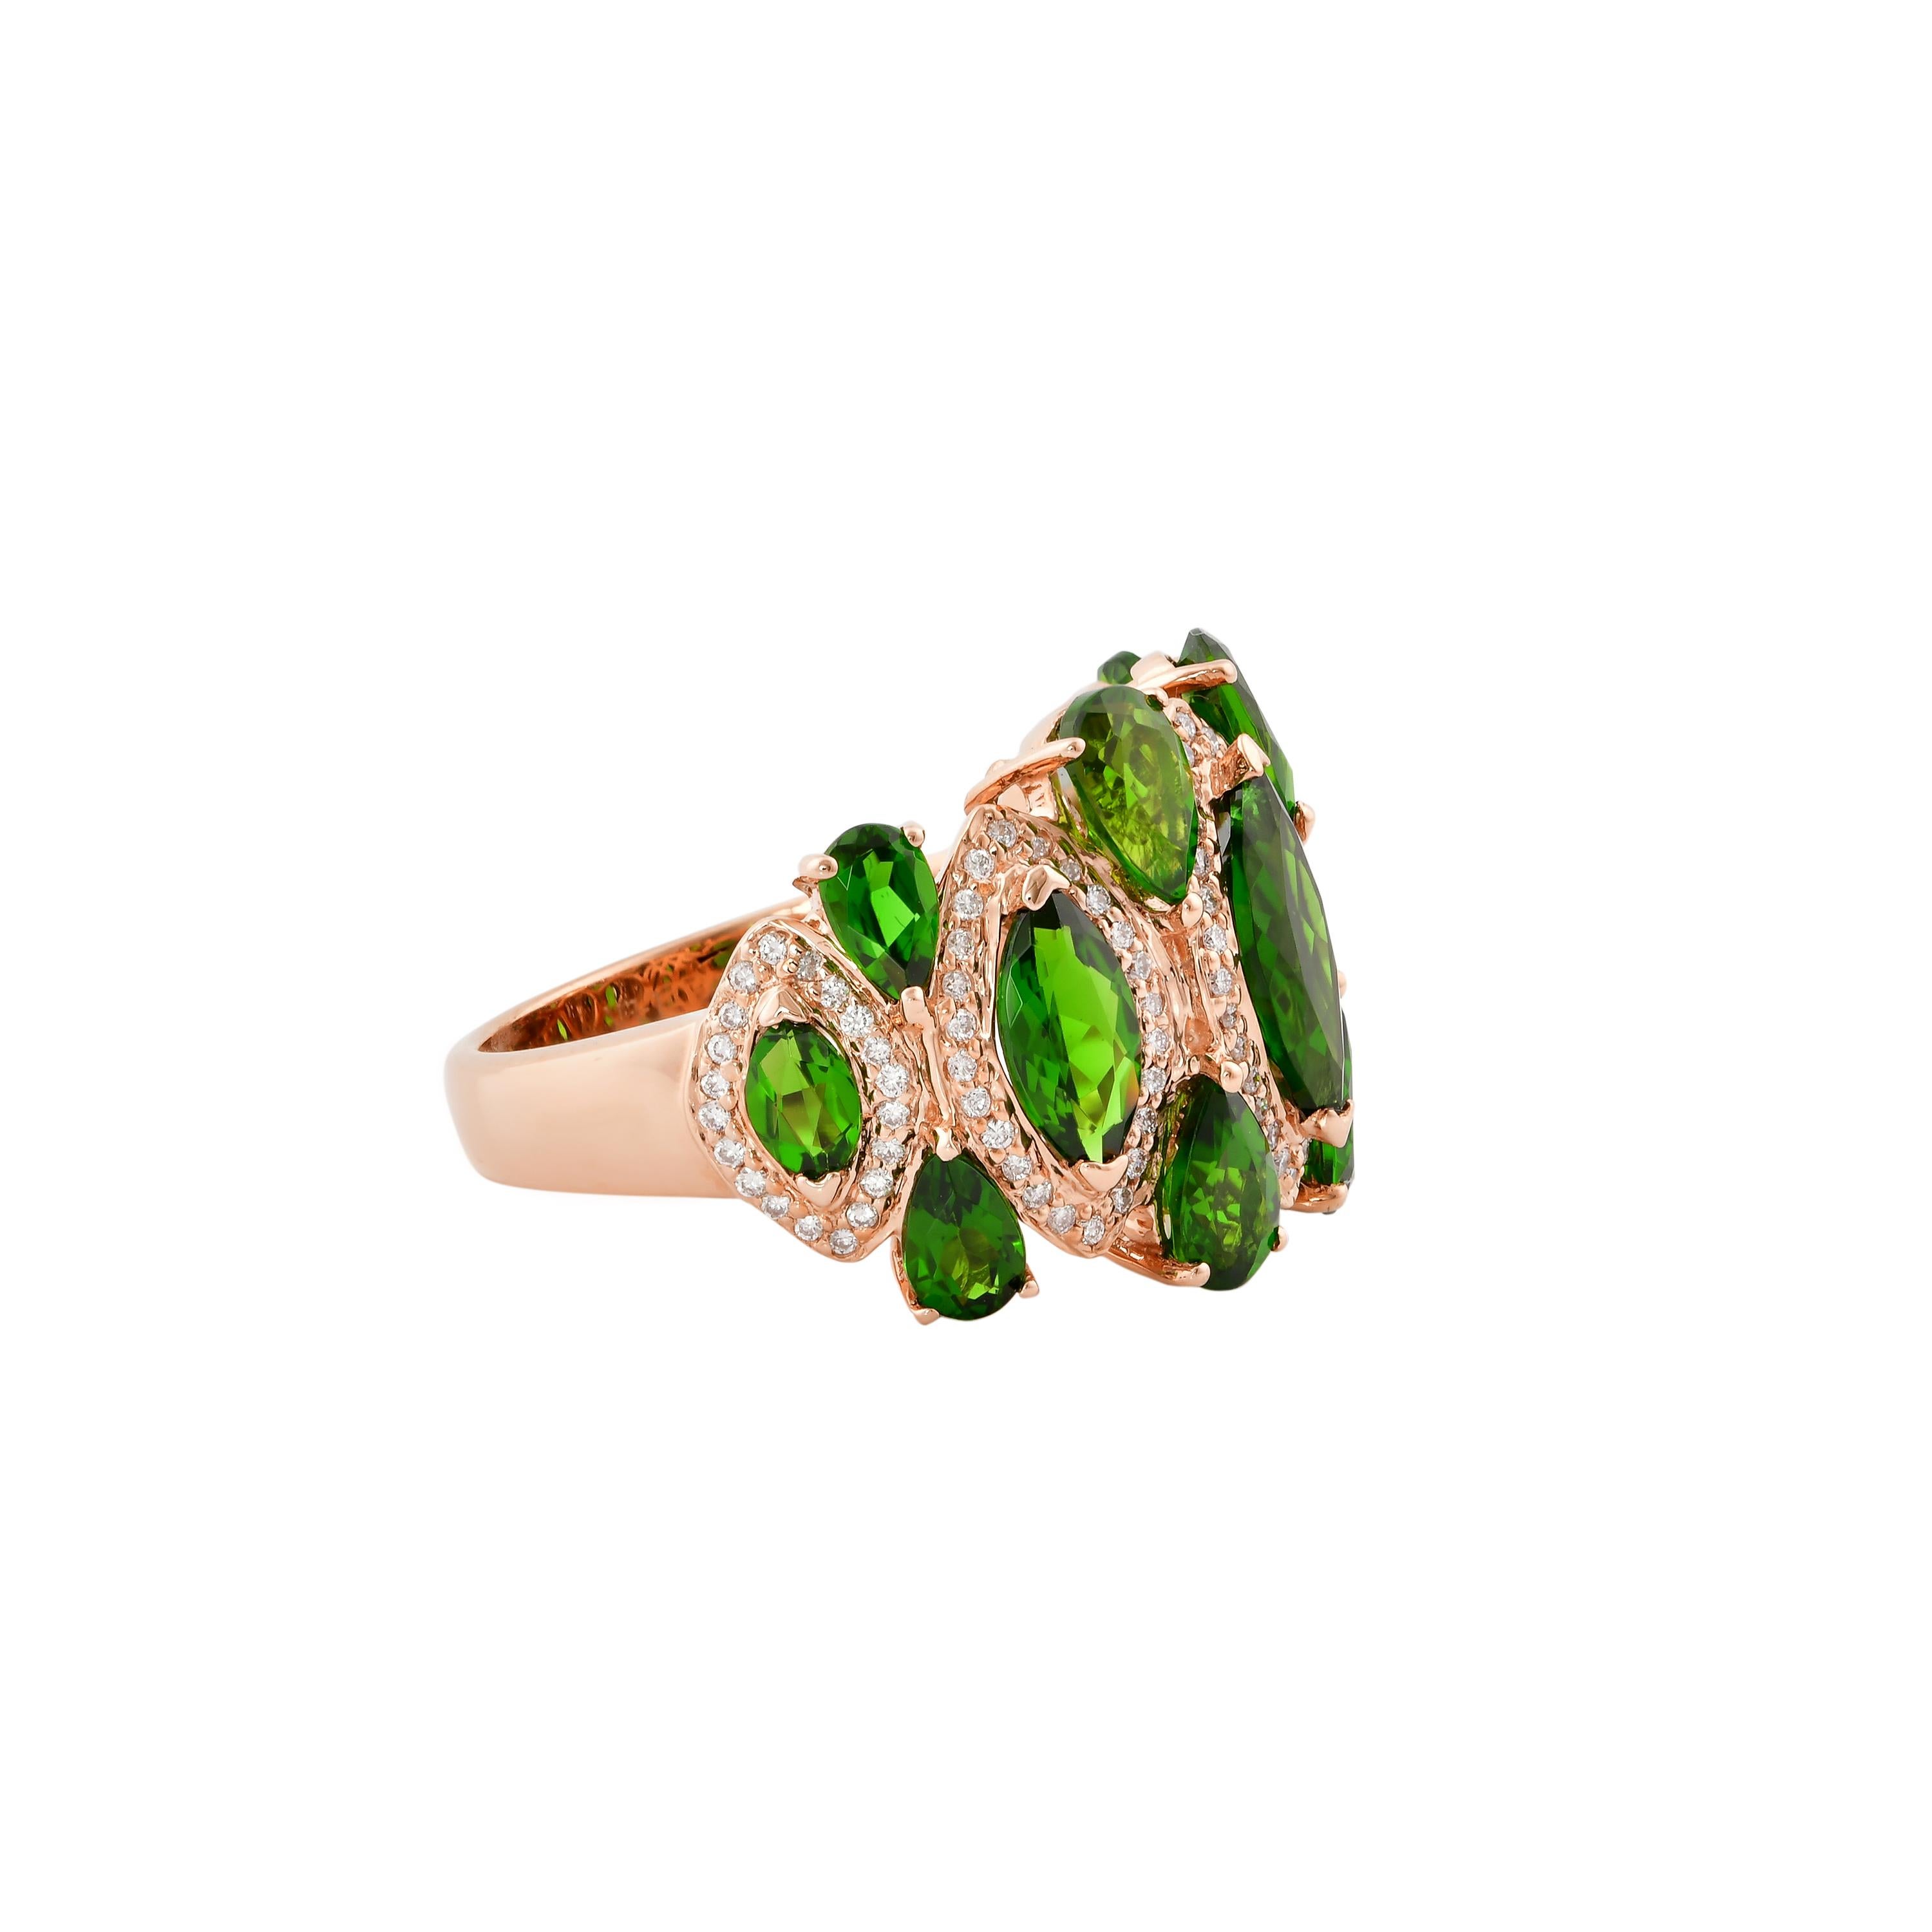 Sunita Nahata presents a collection of fancy cocktail rings with gorgeous gemstones. This ring uniquely pairs pear and marquise shaped chrome diopside accented with diamonds. The banded design makes the a striking yet subtle cocktail ring that will